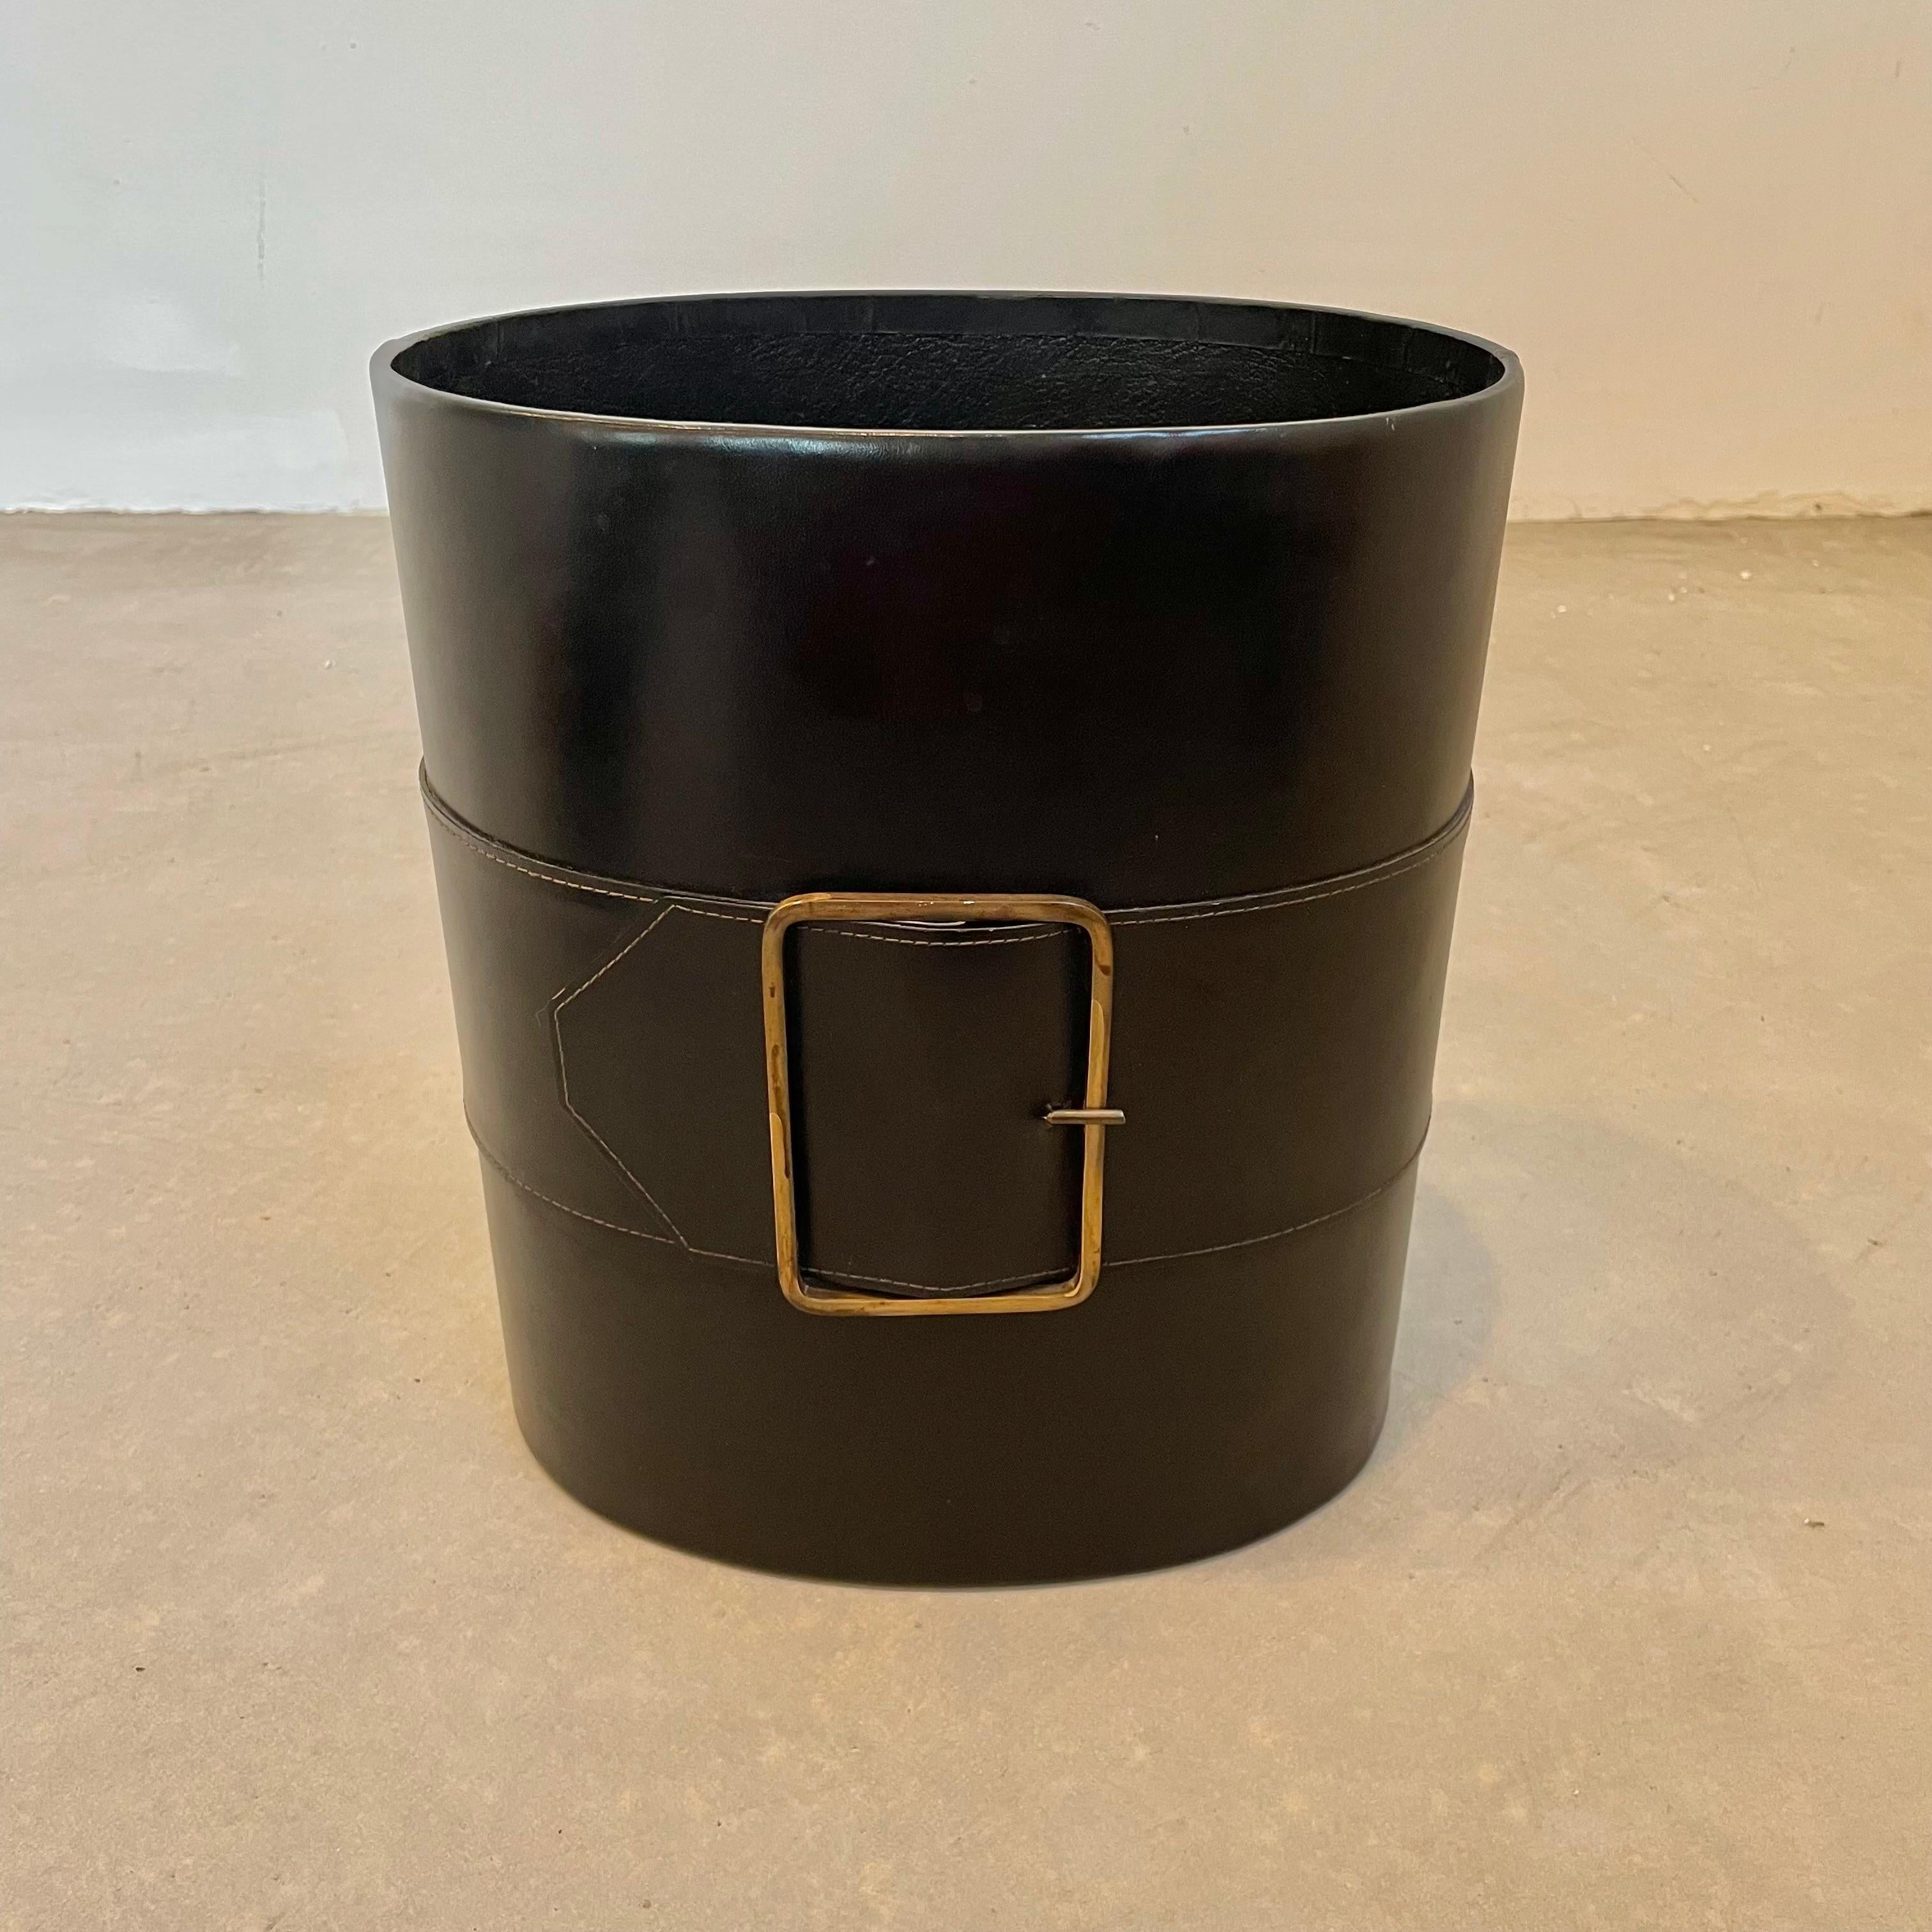 Beautiful black leather waste bin with an oversized strap and brass buckle running across the body. Sturdy cylindrical body with leather interior and base. Great color and good vintage condition. High quality materials that just get better with age. 